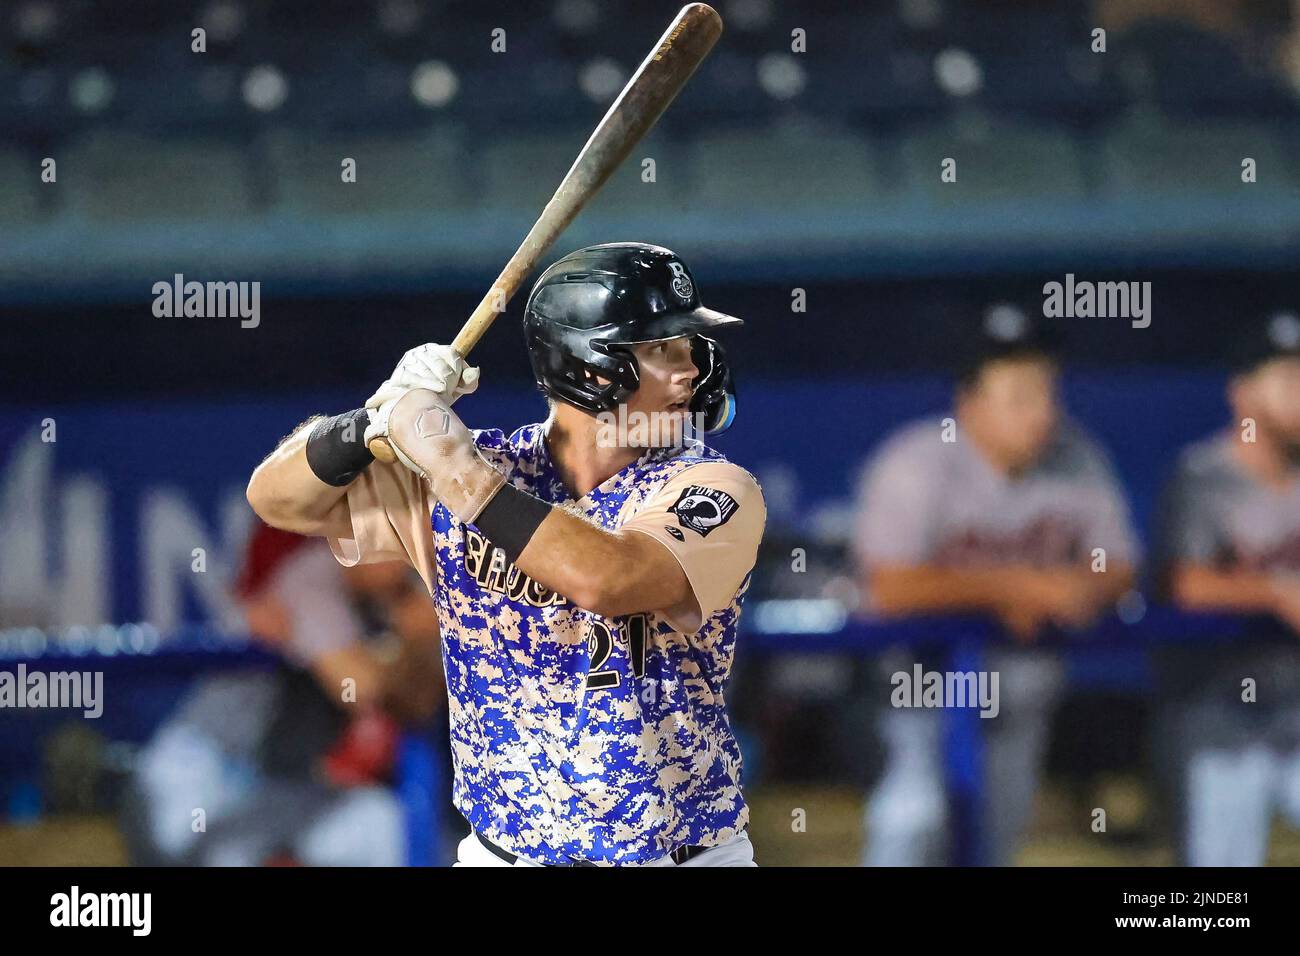 August 10, 2022: Biloxi Shuckers outfielder Tristen Lutz (21) at bat during an MiLB game between the Biloxi Shuckers and Rocket City Trash Pandas at MGM Park in Biloxi, Mississippi. Bobby McDuffie/CSM Stock Photo